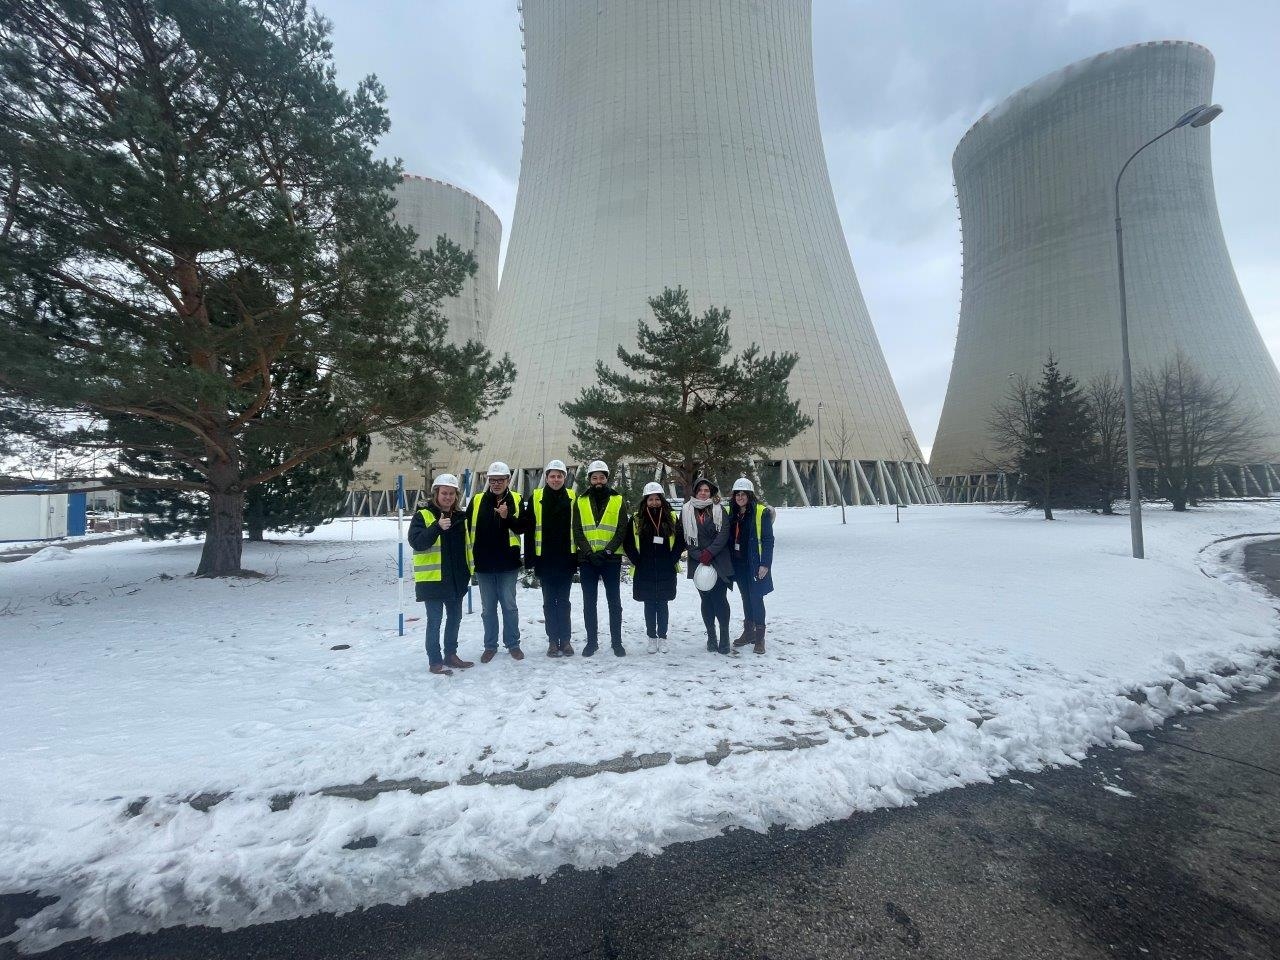 a group of students posing next to a nuclear reactor